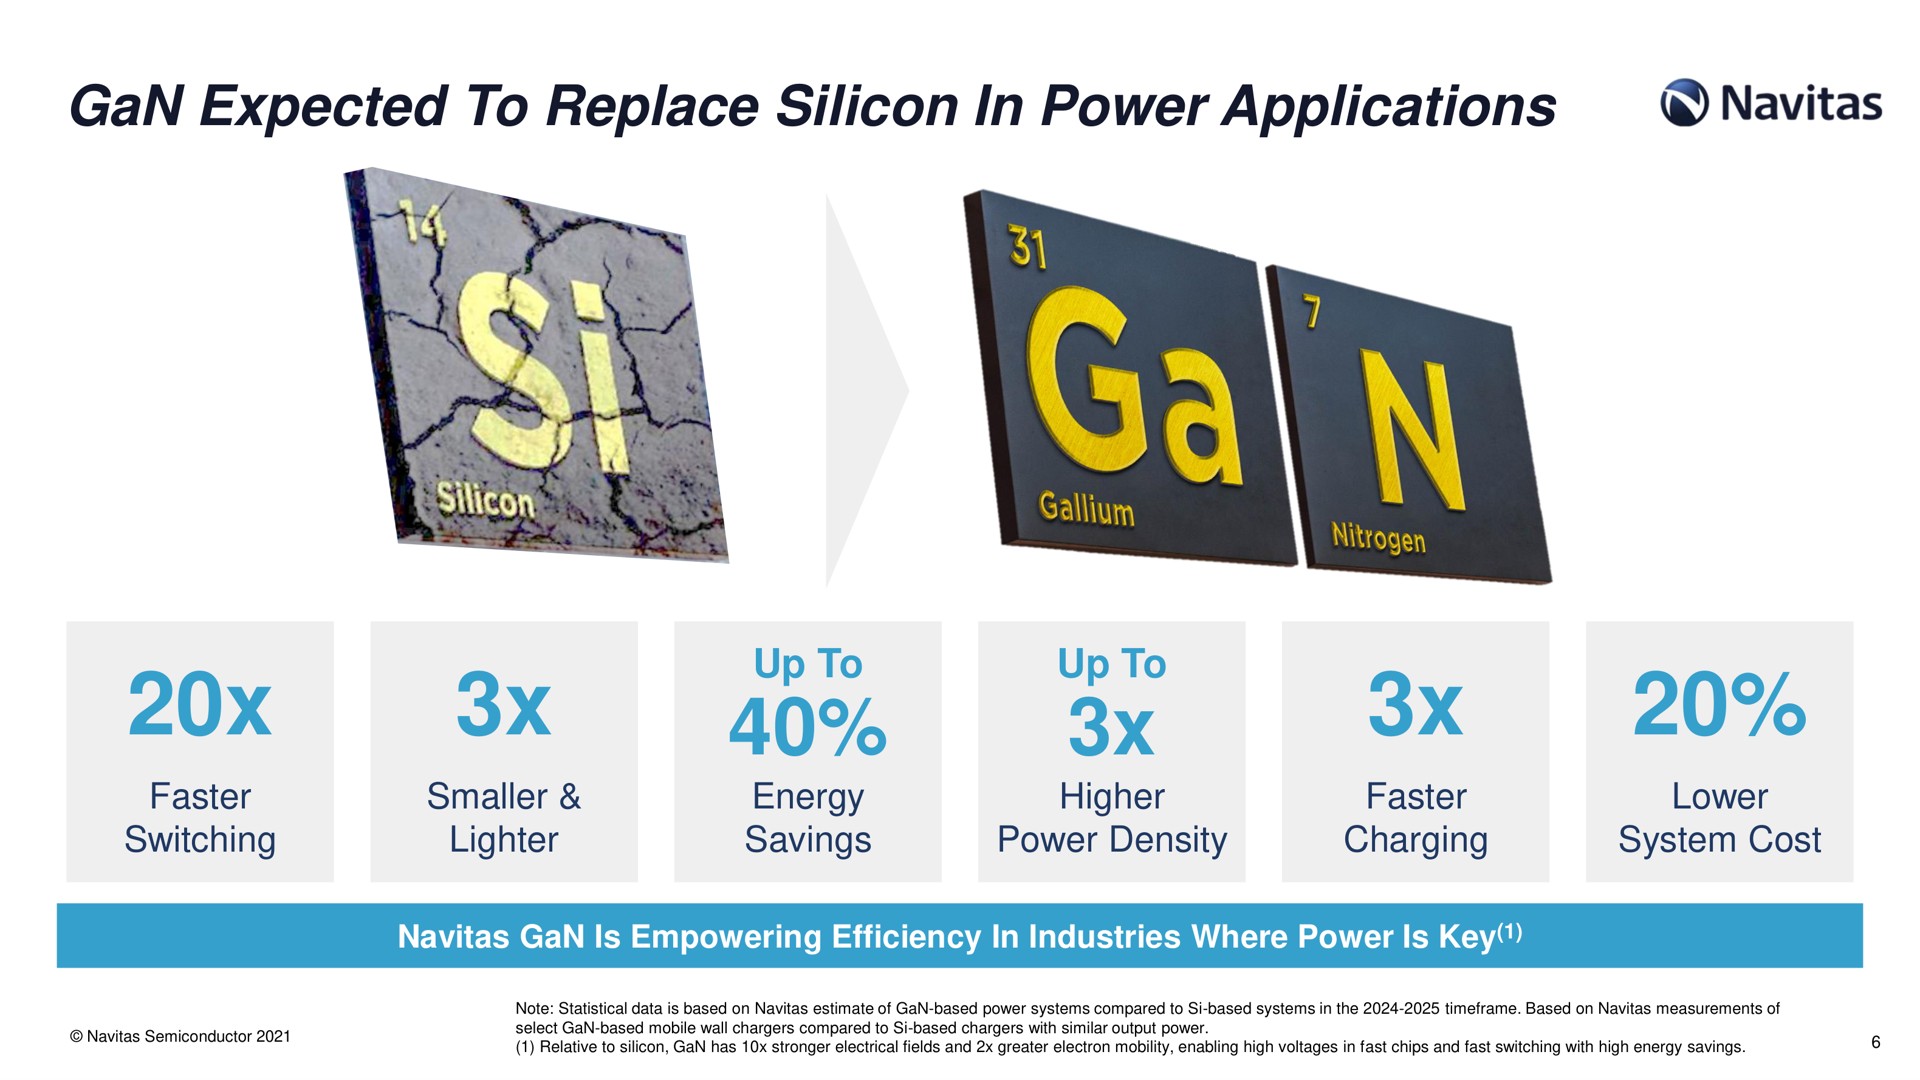 gan expected to replace silicon in power applications | Navitas